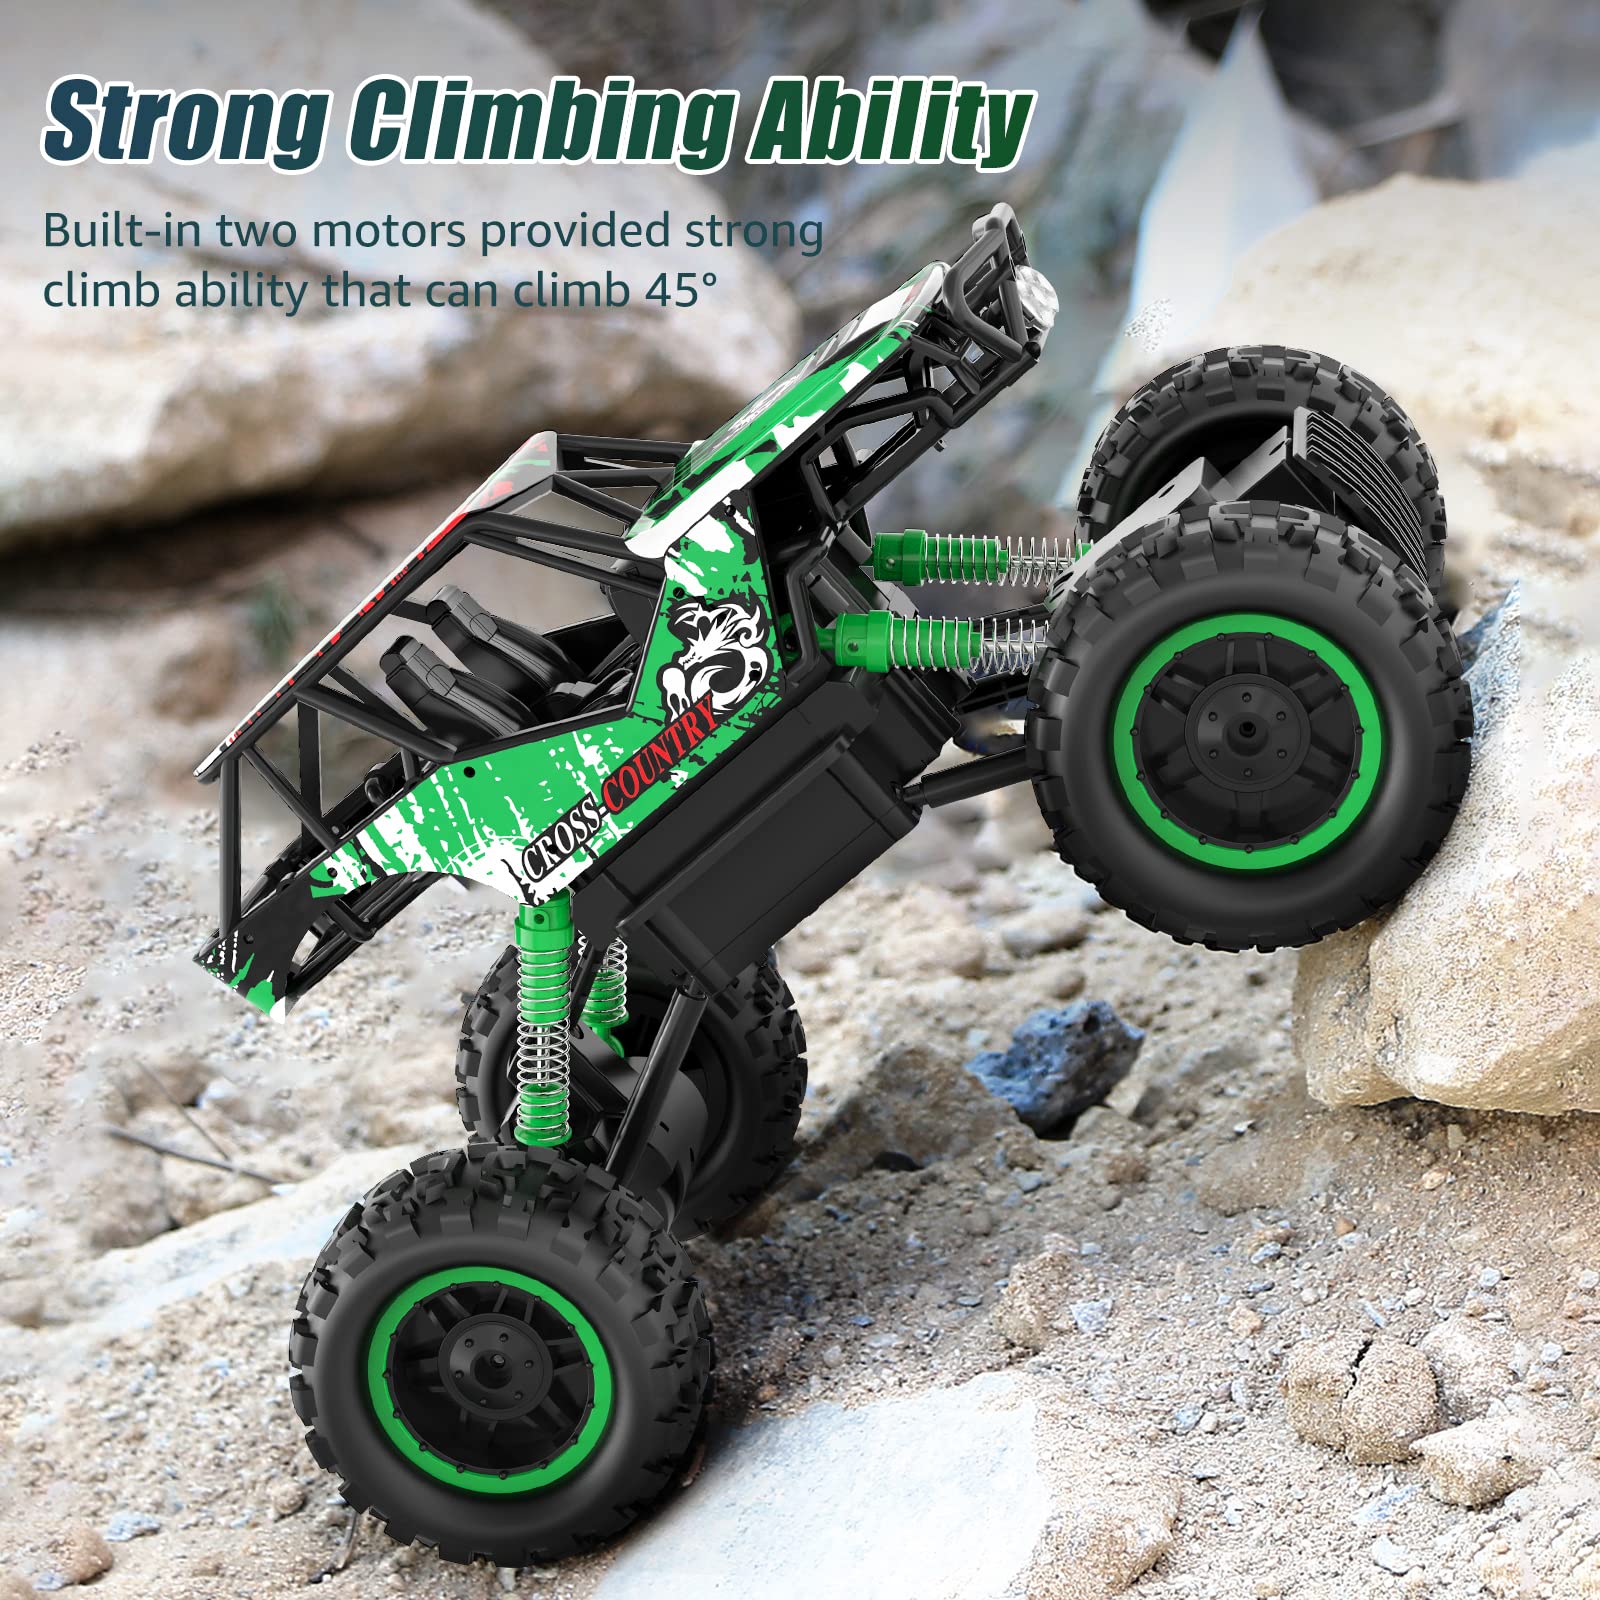 DOUBLE E 1:12 Remote Control Car Monster Trucks with Head Lights 4WD Off All Terrain RC Car Rechargeable Vehicles